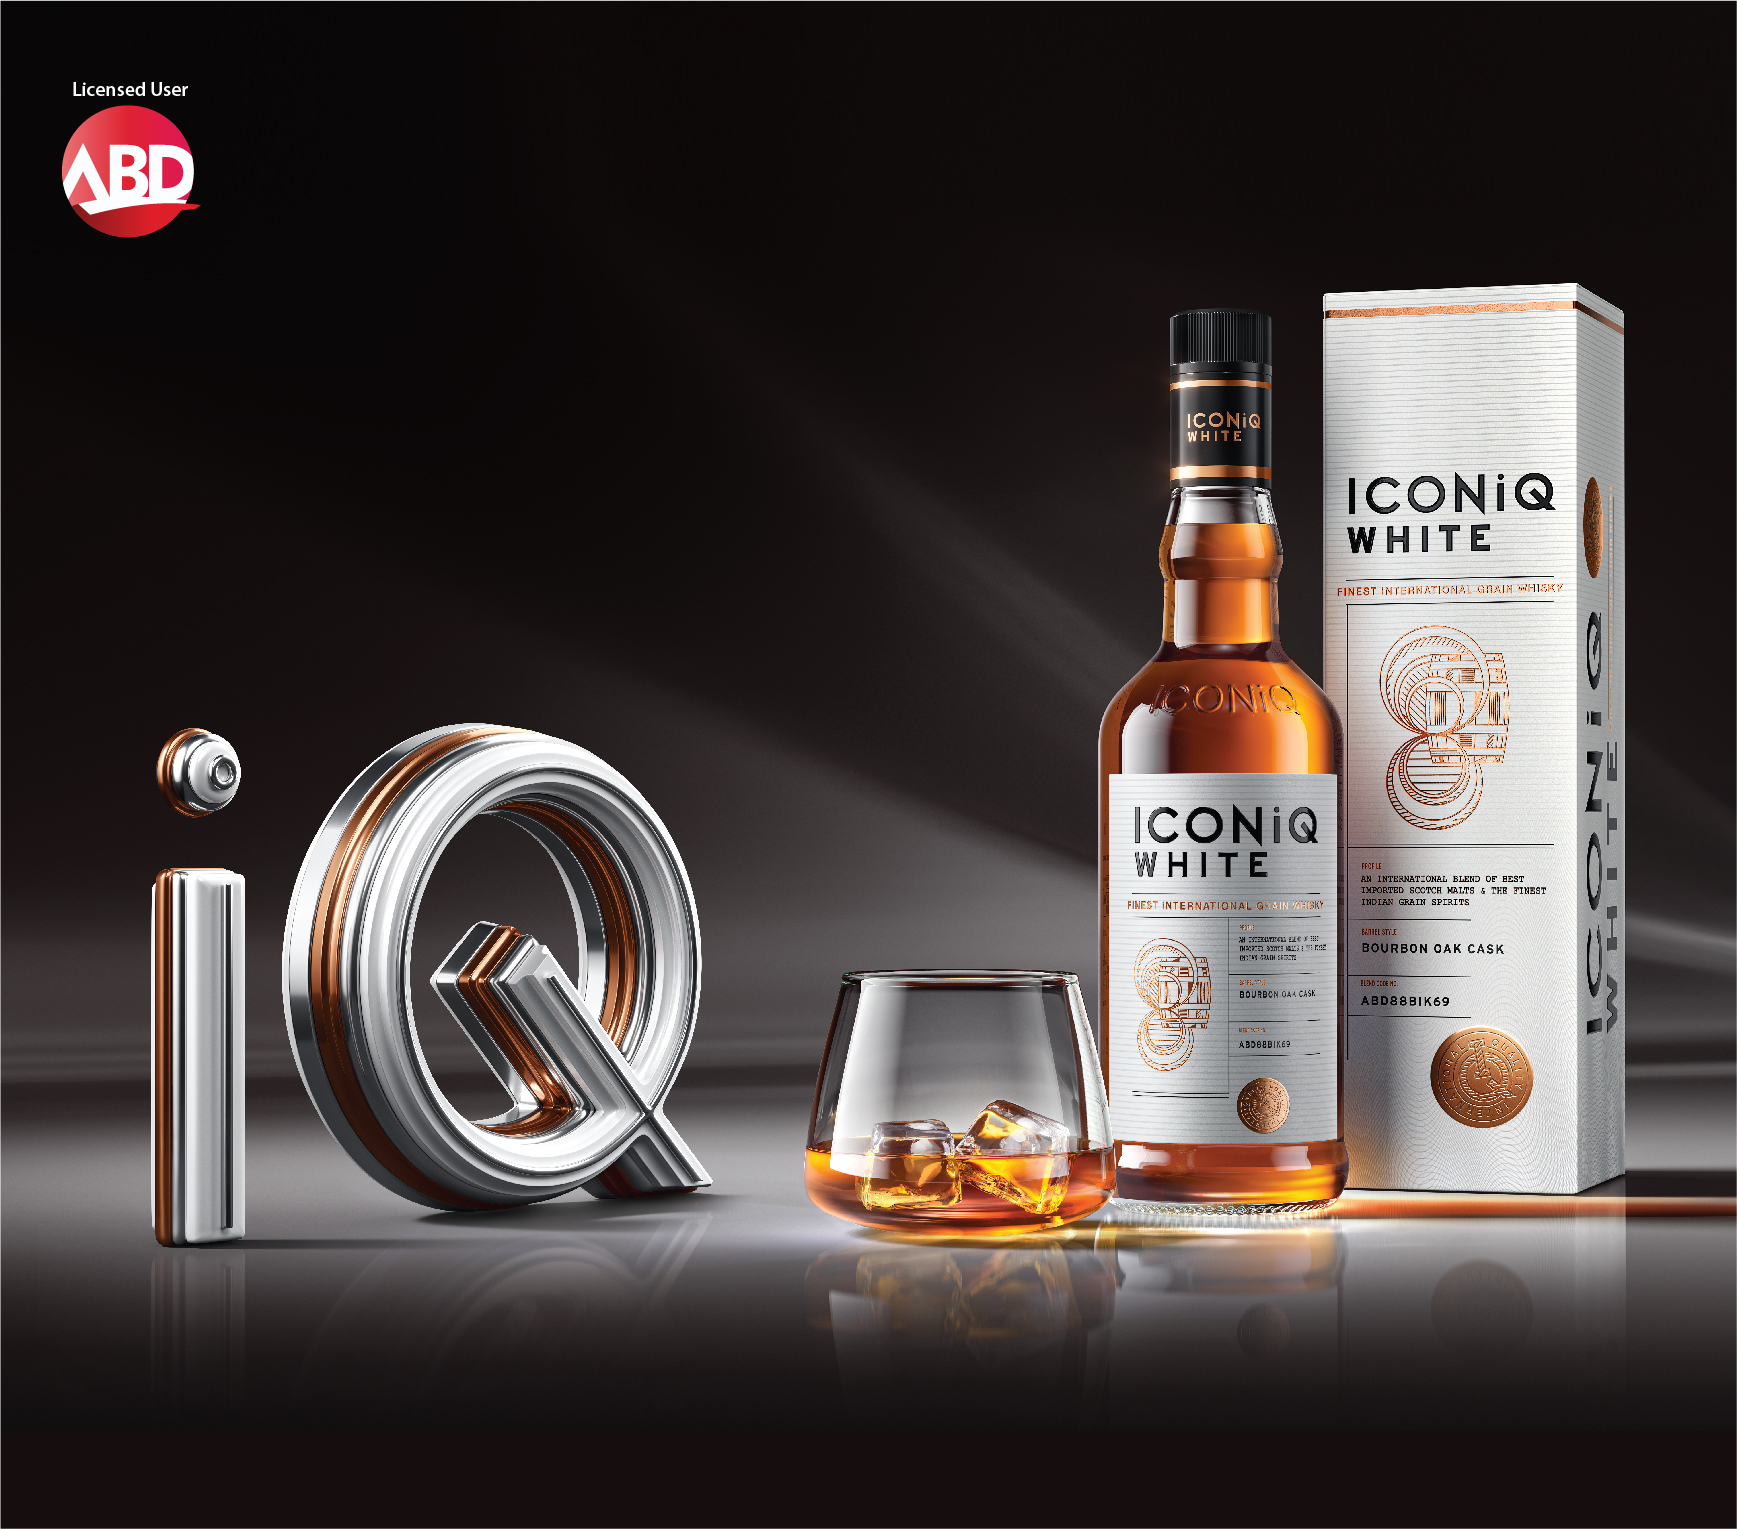 ICONiQ White Whisky and Sterling Reserve B7 Whisky Cola Mix brings new and unique experiences to Assam